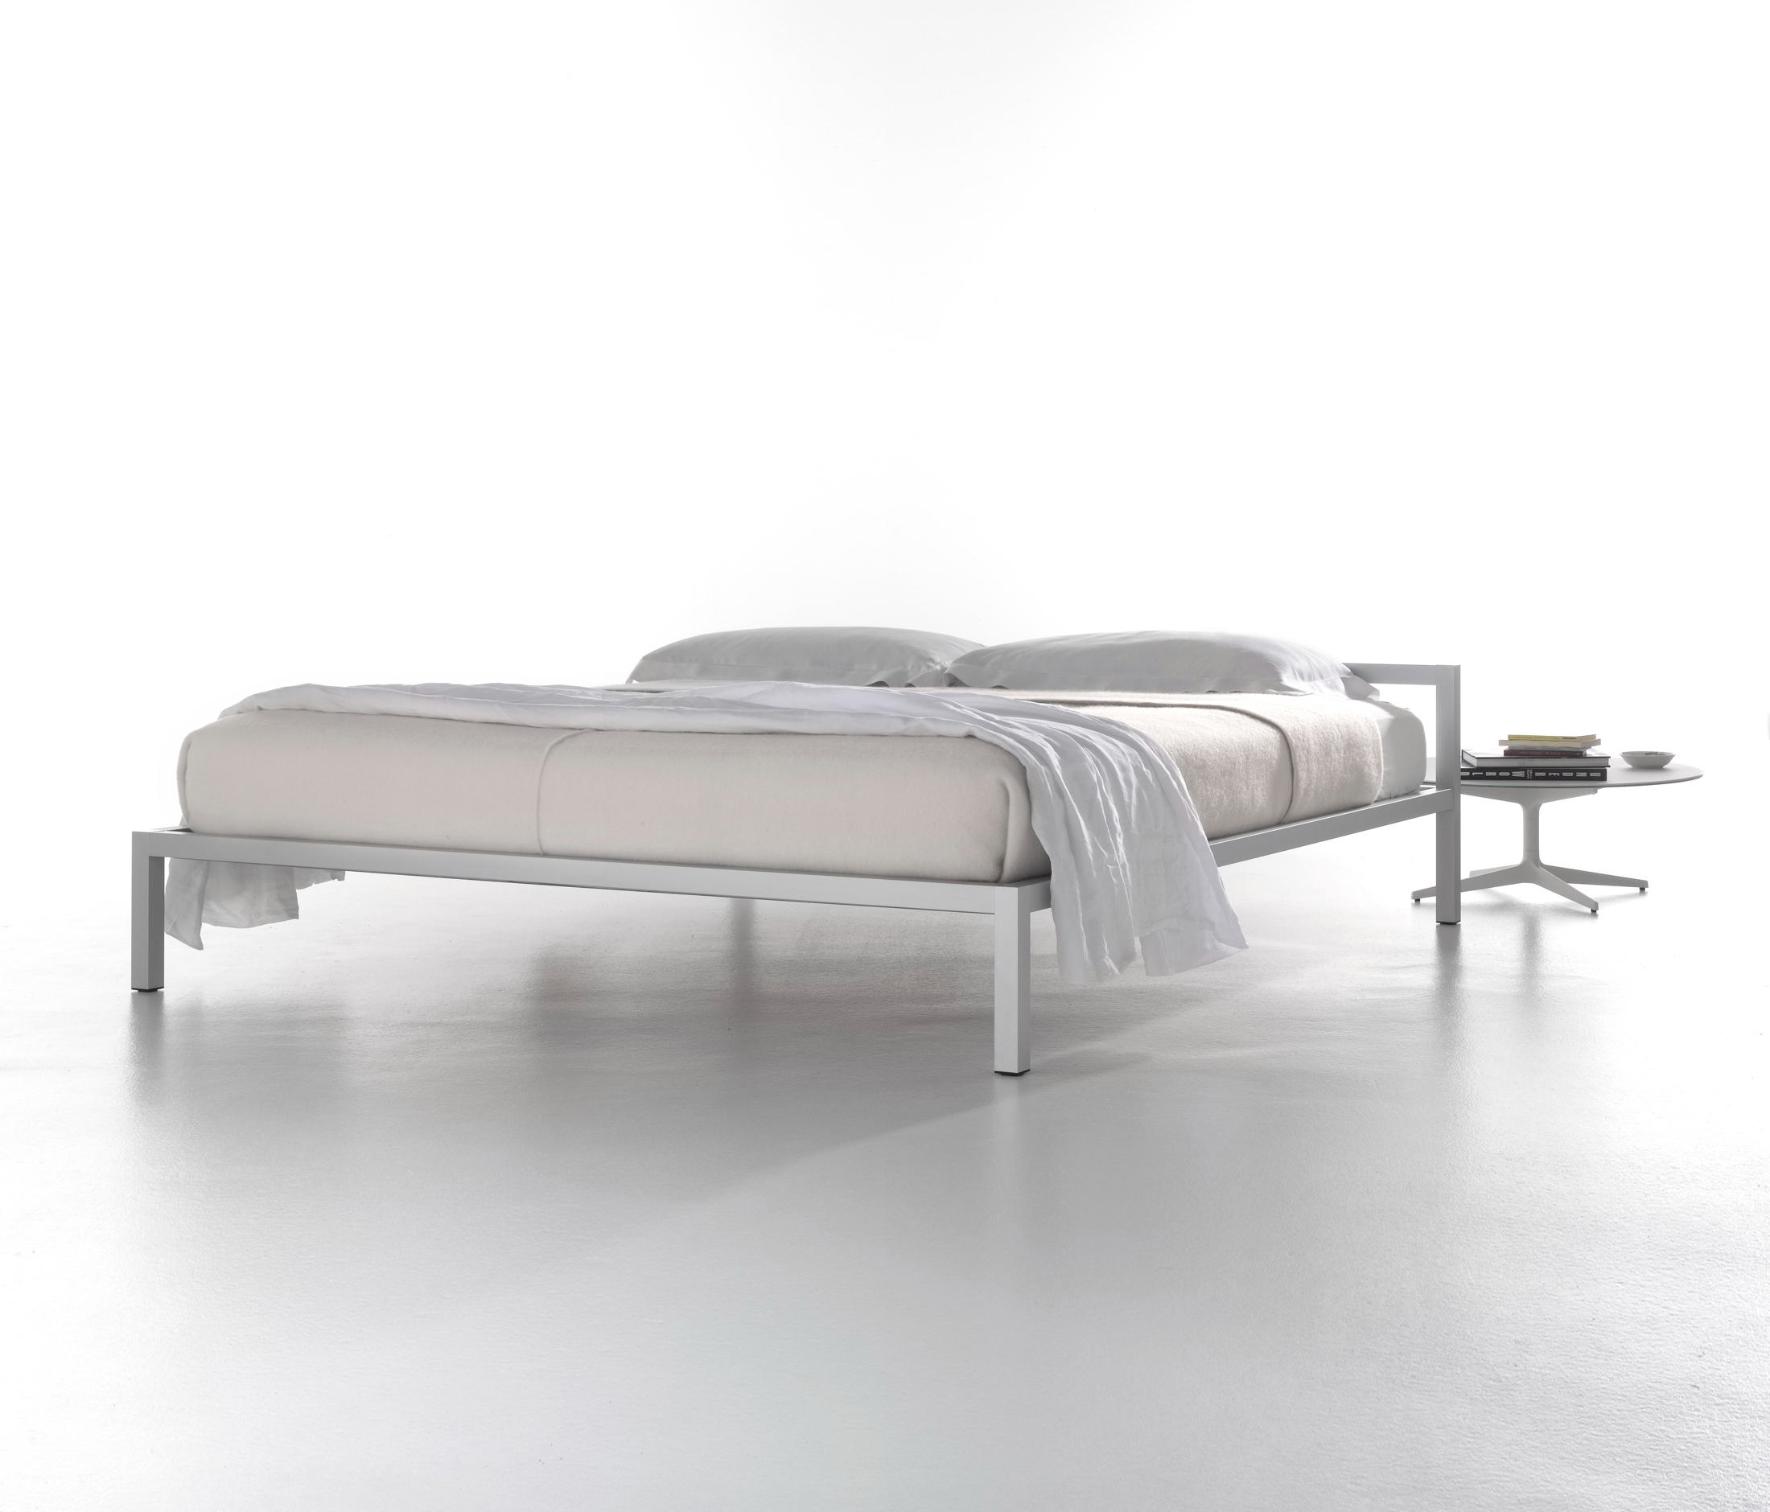 Aluminium Bed with Italian Precision ☞ Structure: Gloss Painted Black X061 ☞ Dimensions: 190 x 210 cm